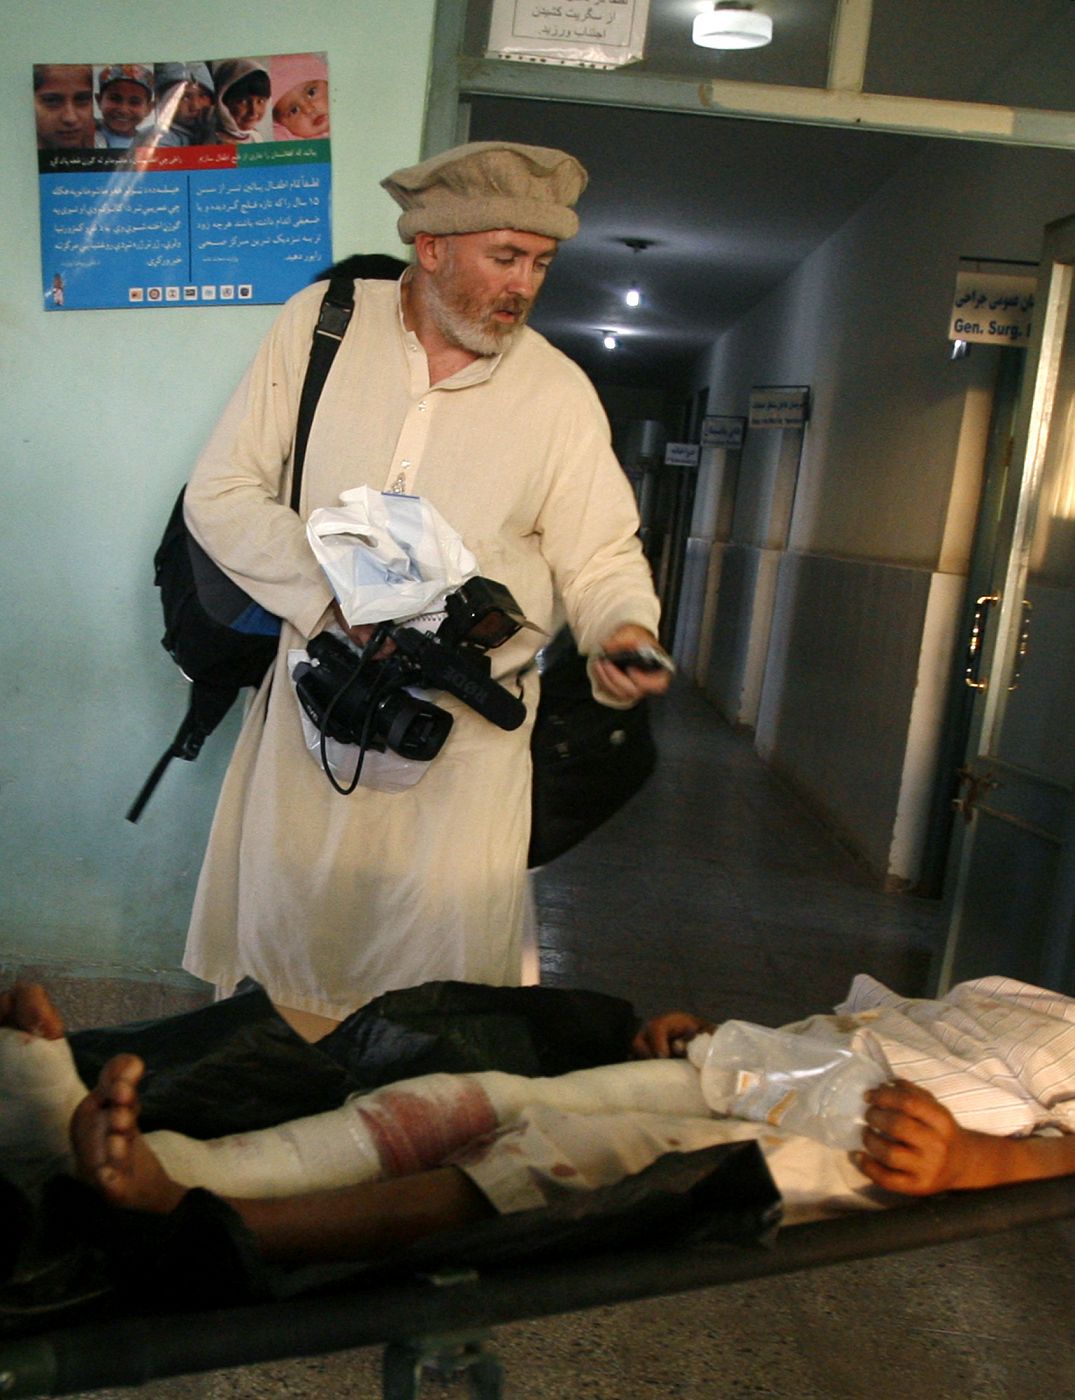 Stephen Farrell, British reporter for the New York Times, films a wounded Afghan man in a hospital in Kunduz